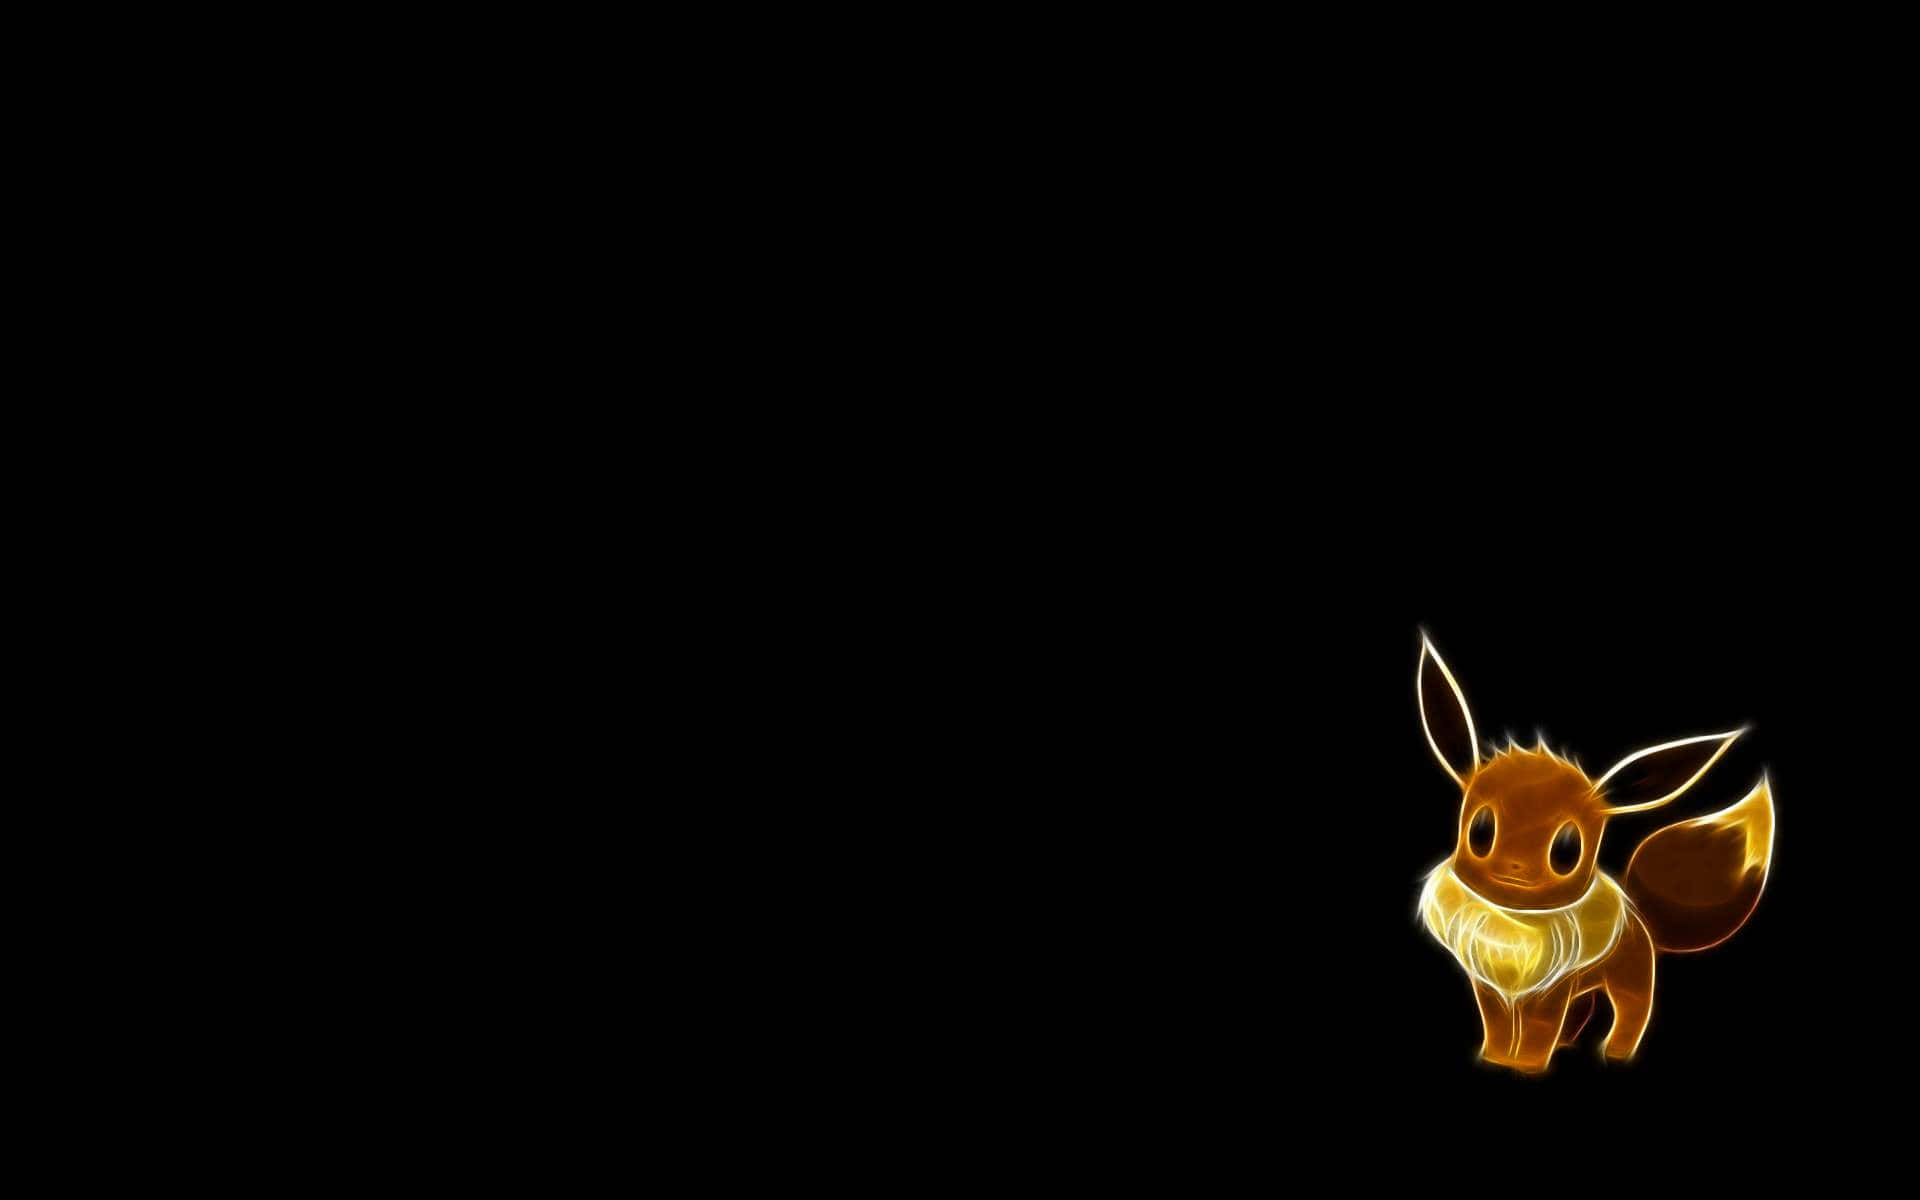 A Gold Eevee With A Black Background Wallpaper